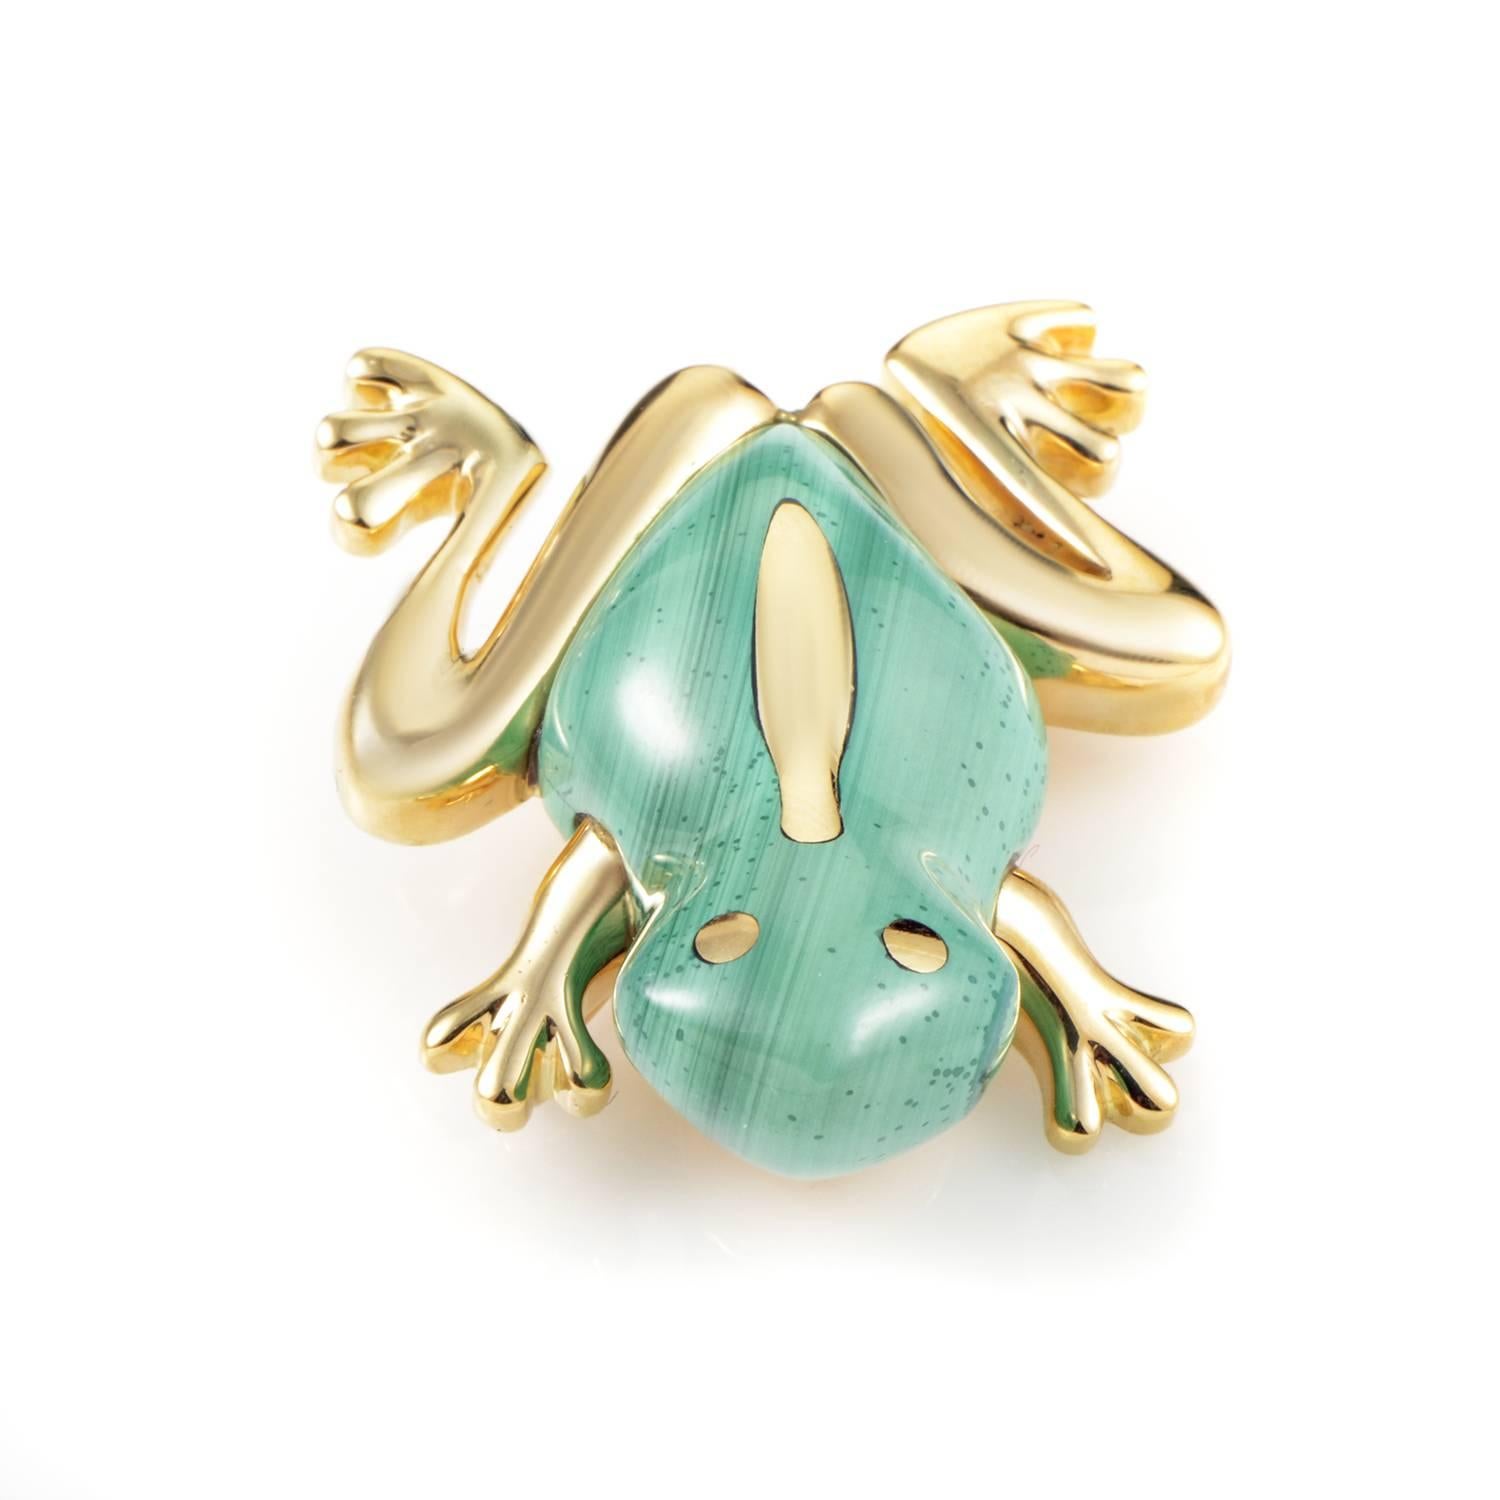 Wonderfully offbeat and crafted to perfection from tastefully complementing materials, this adorable brooch from Tiffany & Co. is designed in the shape of a frog, with fitting malachite stone set upon luxurious 18K yellow gold for a fantastic